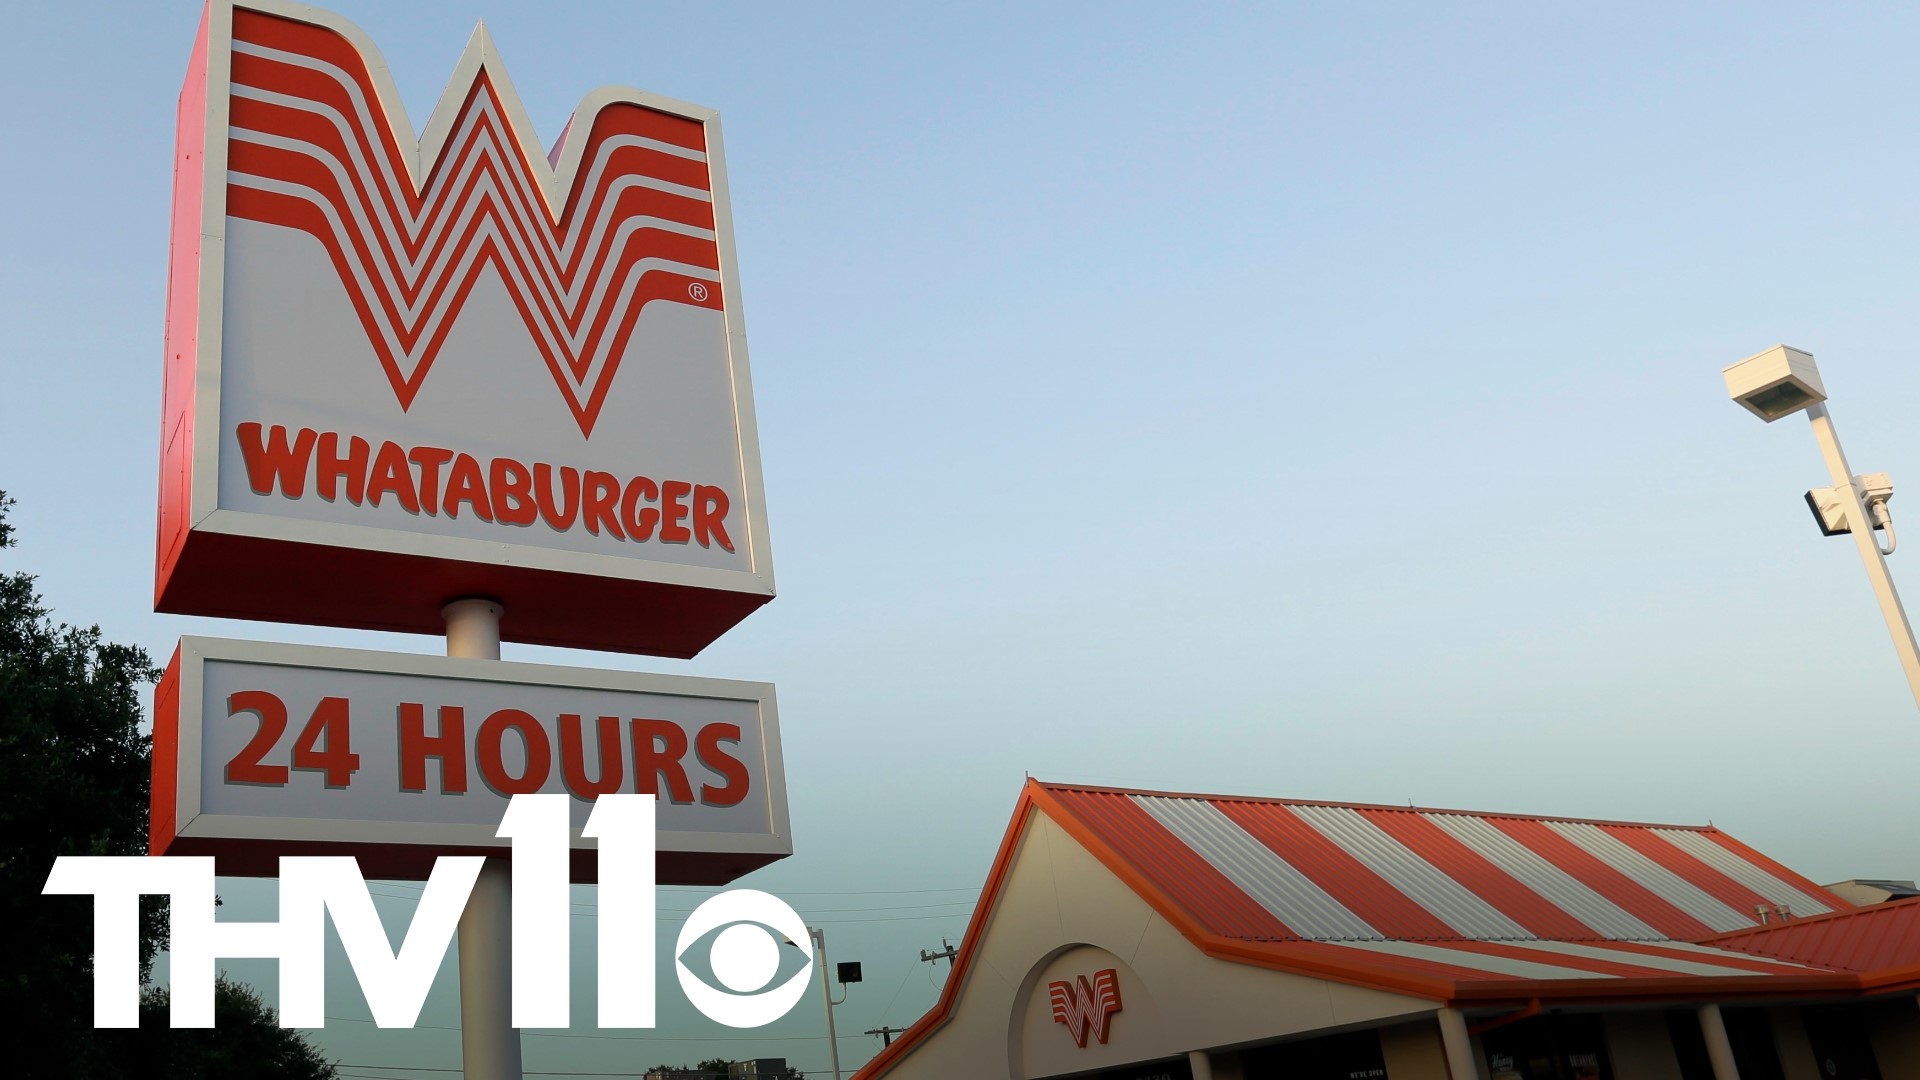 A brand new Whataburger in North Little Rock is set to open its doors on Tuesday, August 22.